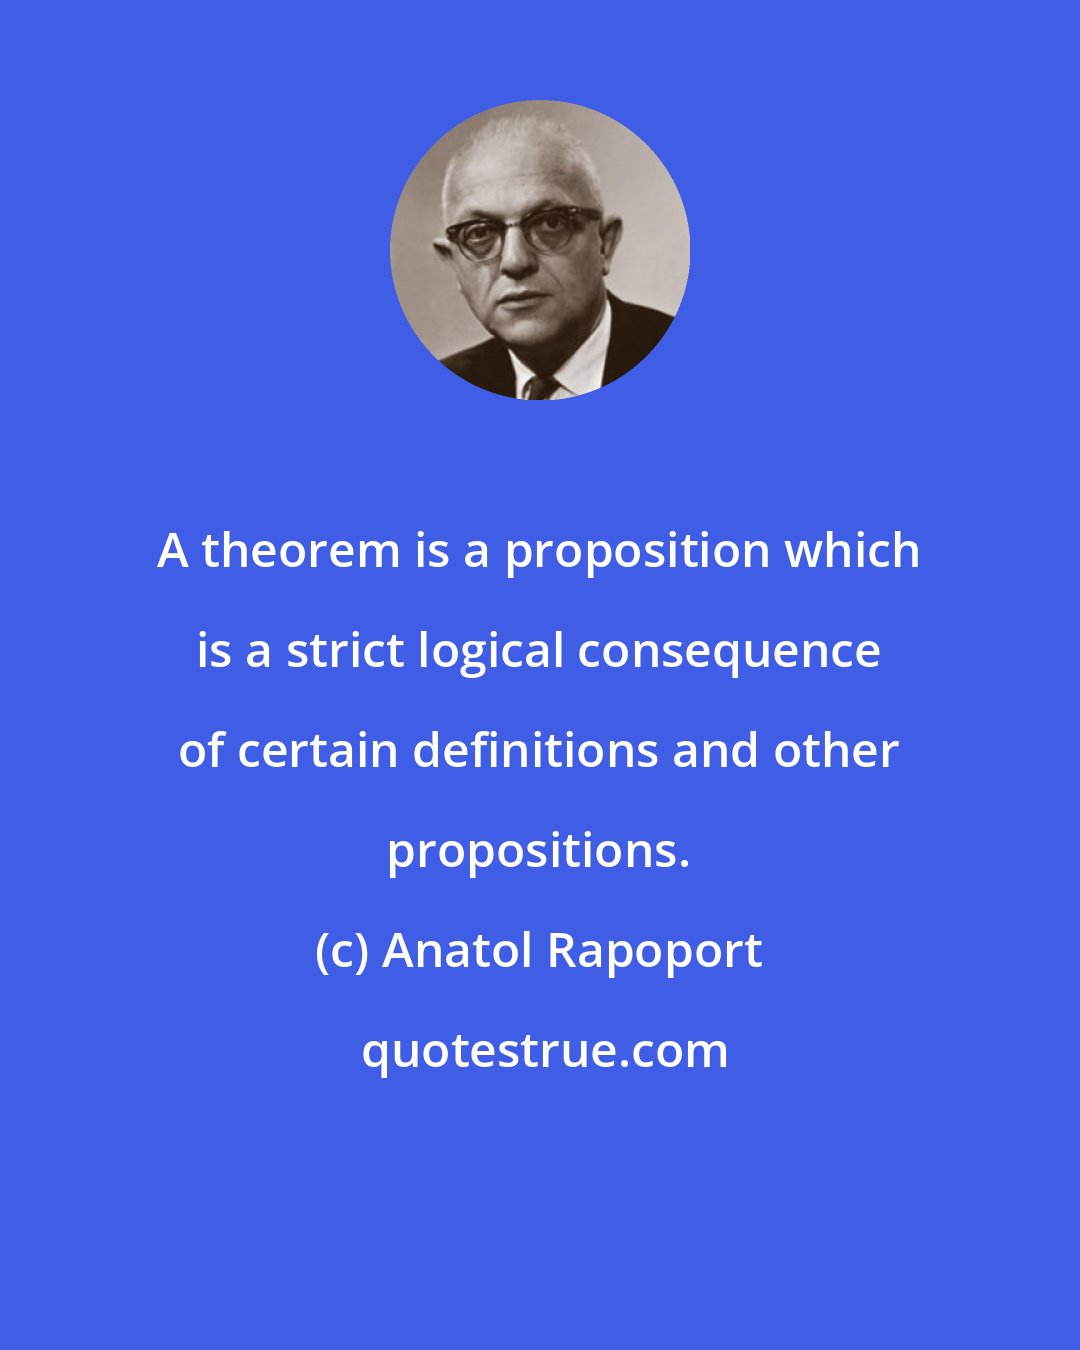 Anatol Rapoport: A theorem is a proposition which is a strict logical consequence of certain definitions and other propositions.